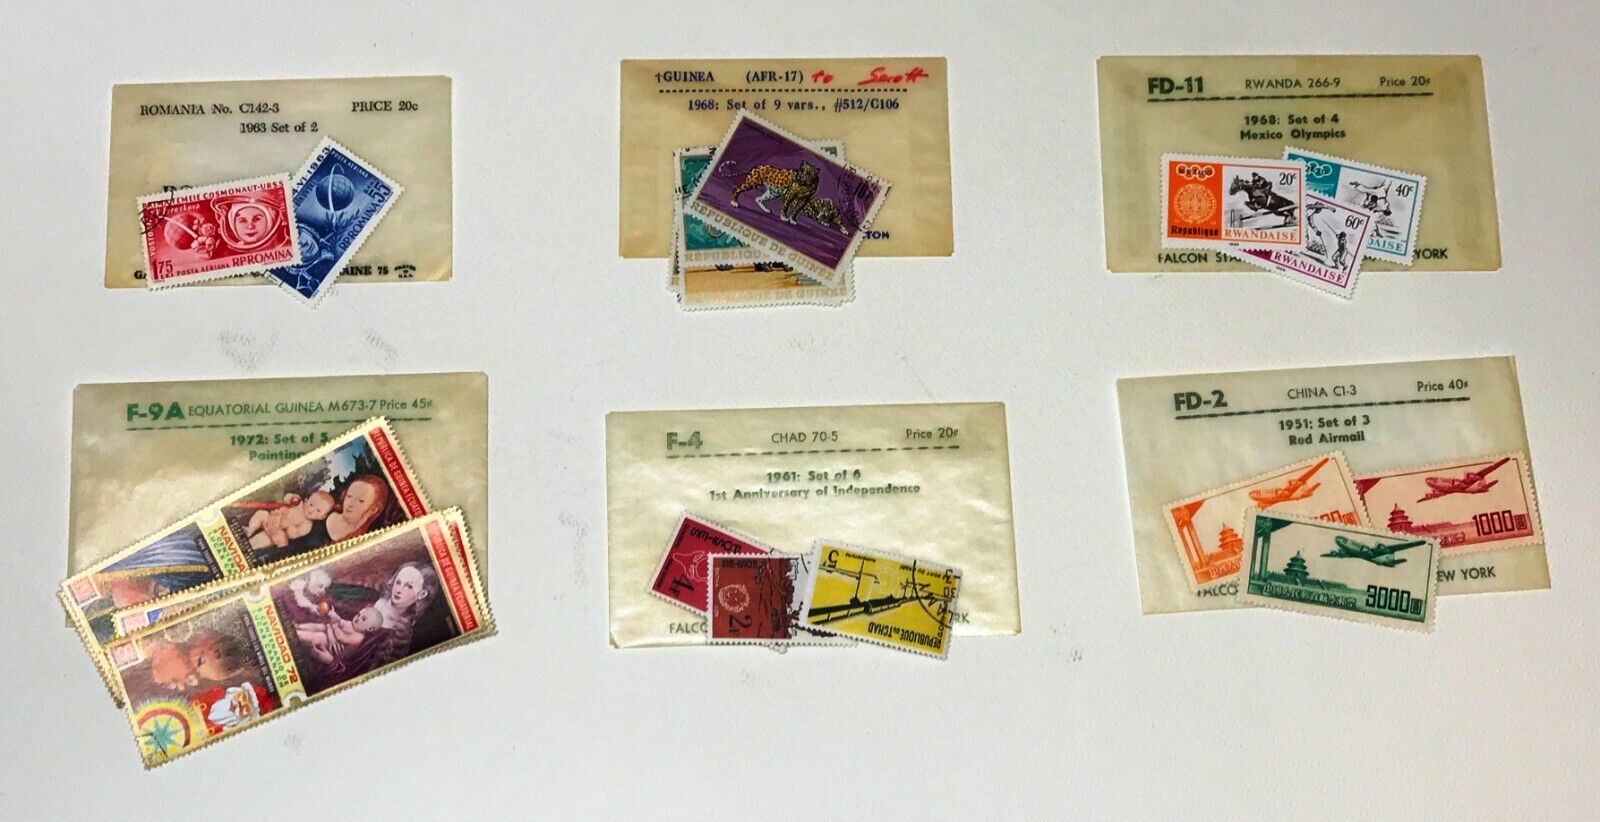 Vintage Foreign Stamp Lot    6 Packets    Multiple Stamps Each Packet   Lot D